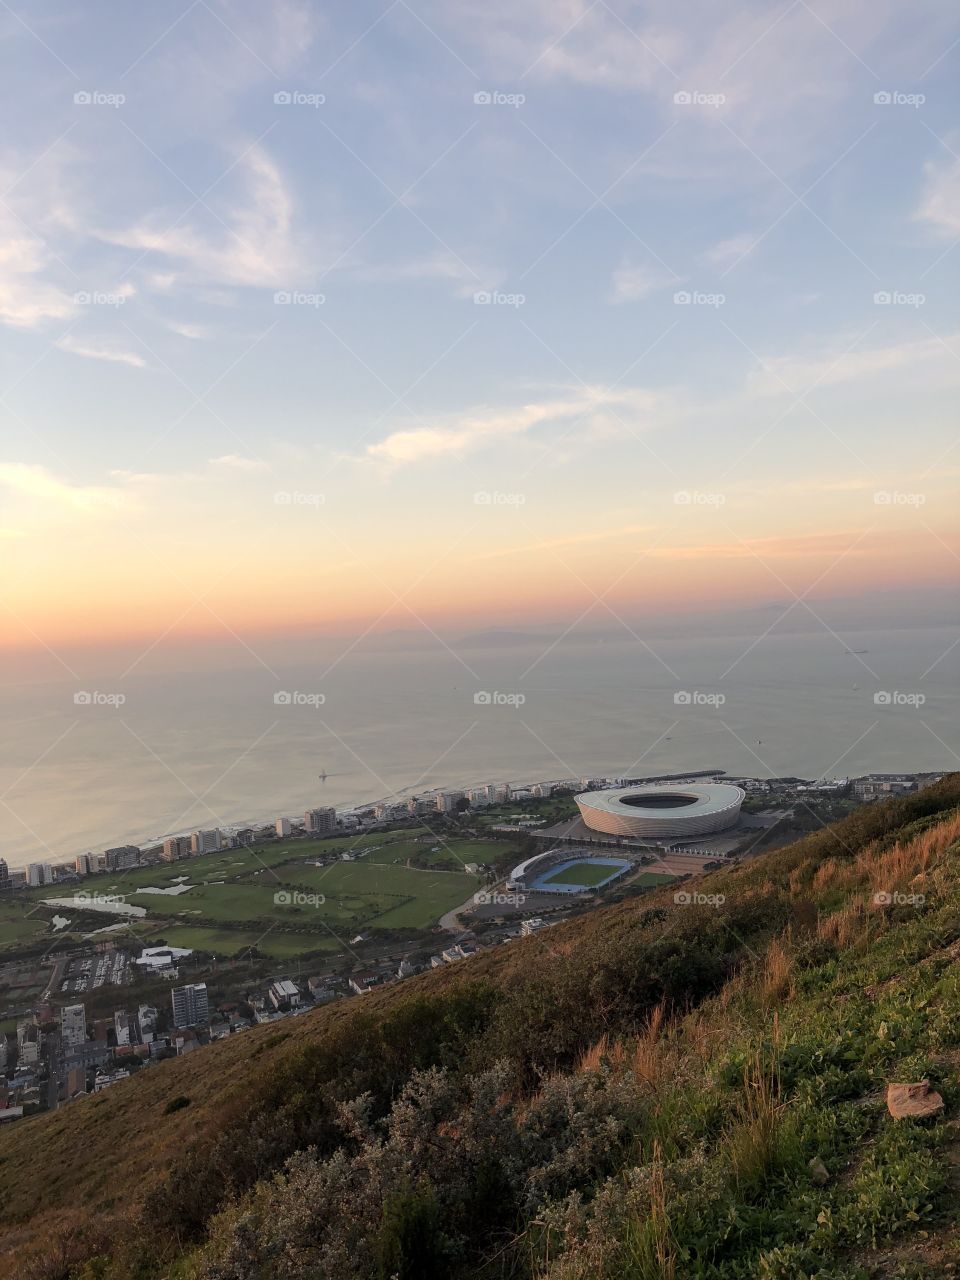 Top of Signal Hill featuring the Cape Town stadium in the background. 